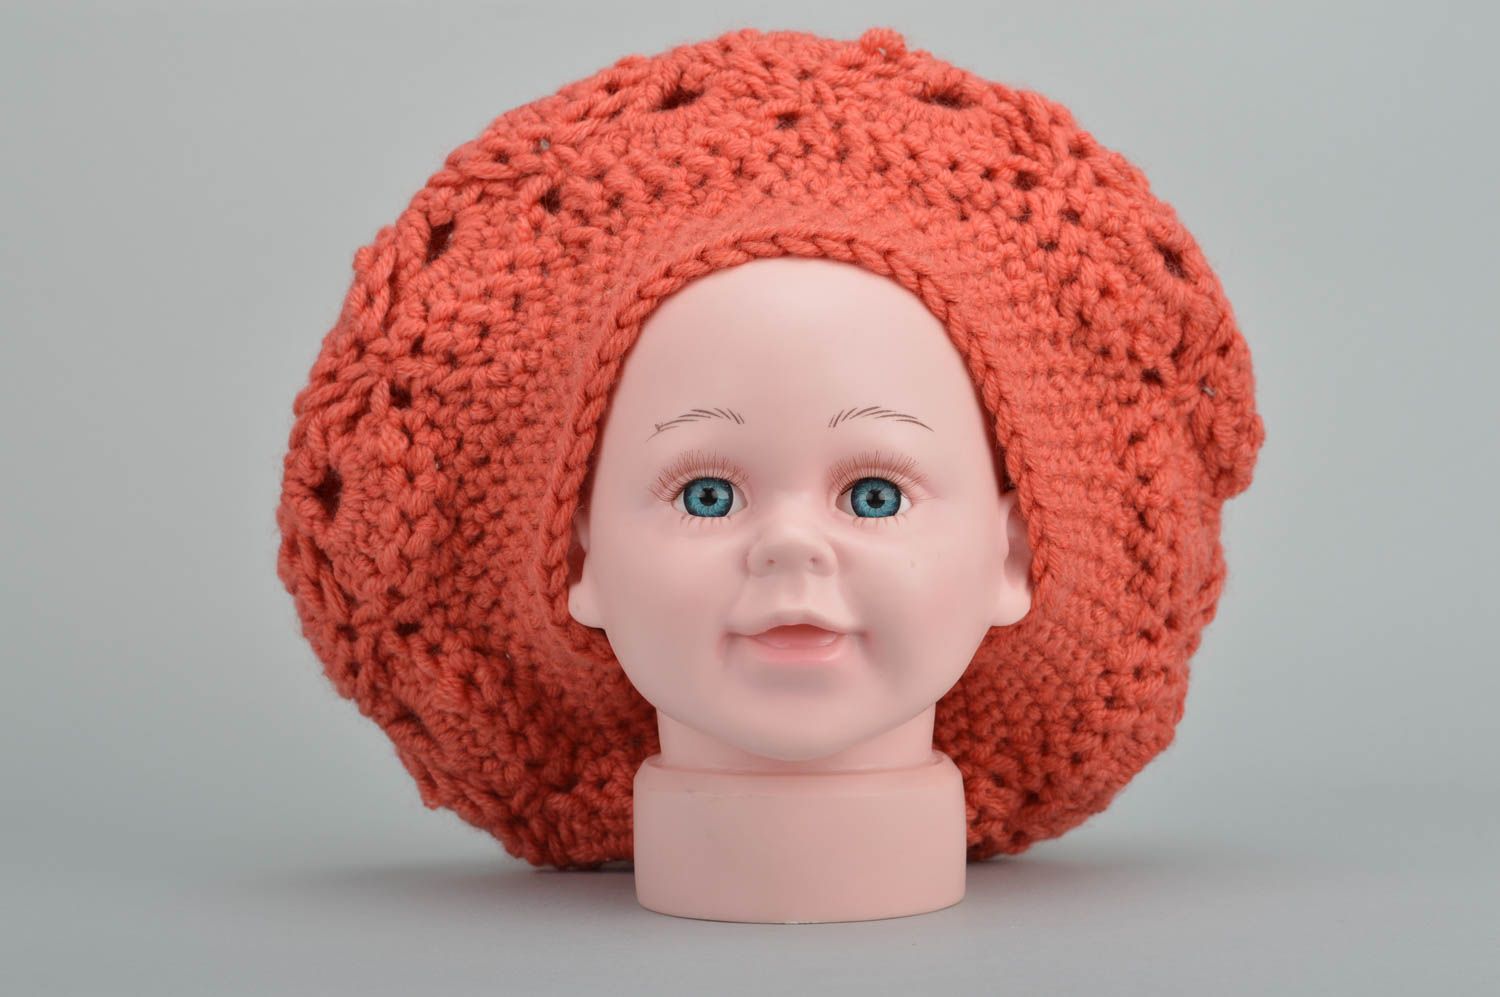 Handmade peach color crocheted beret for children made of wool and cotton photo 4